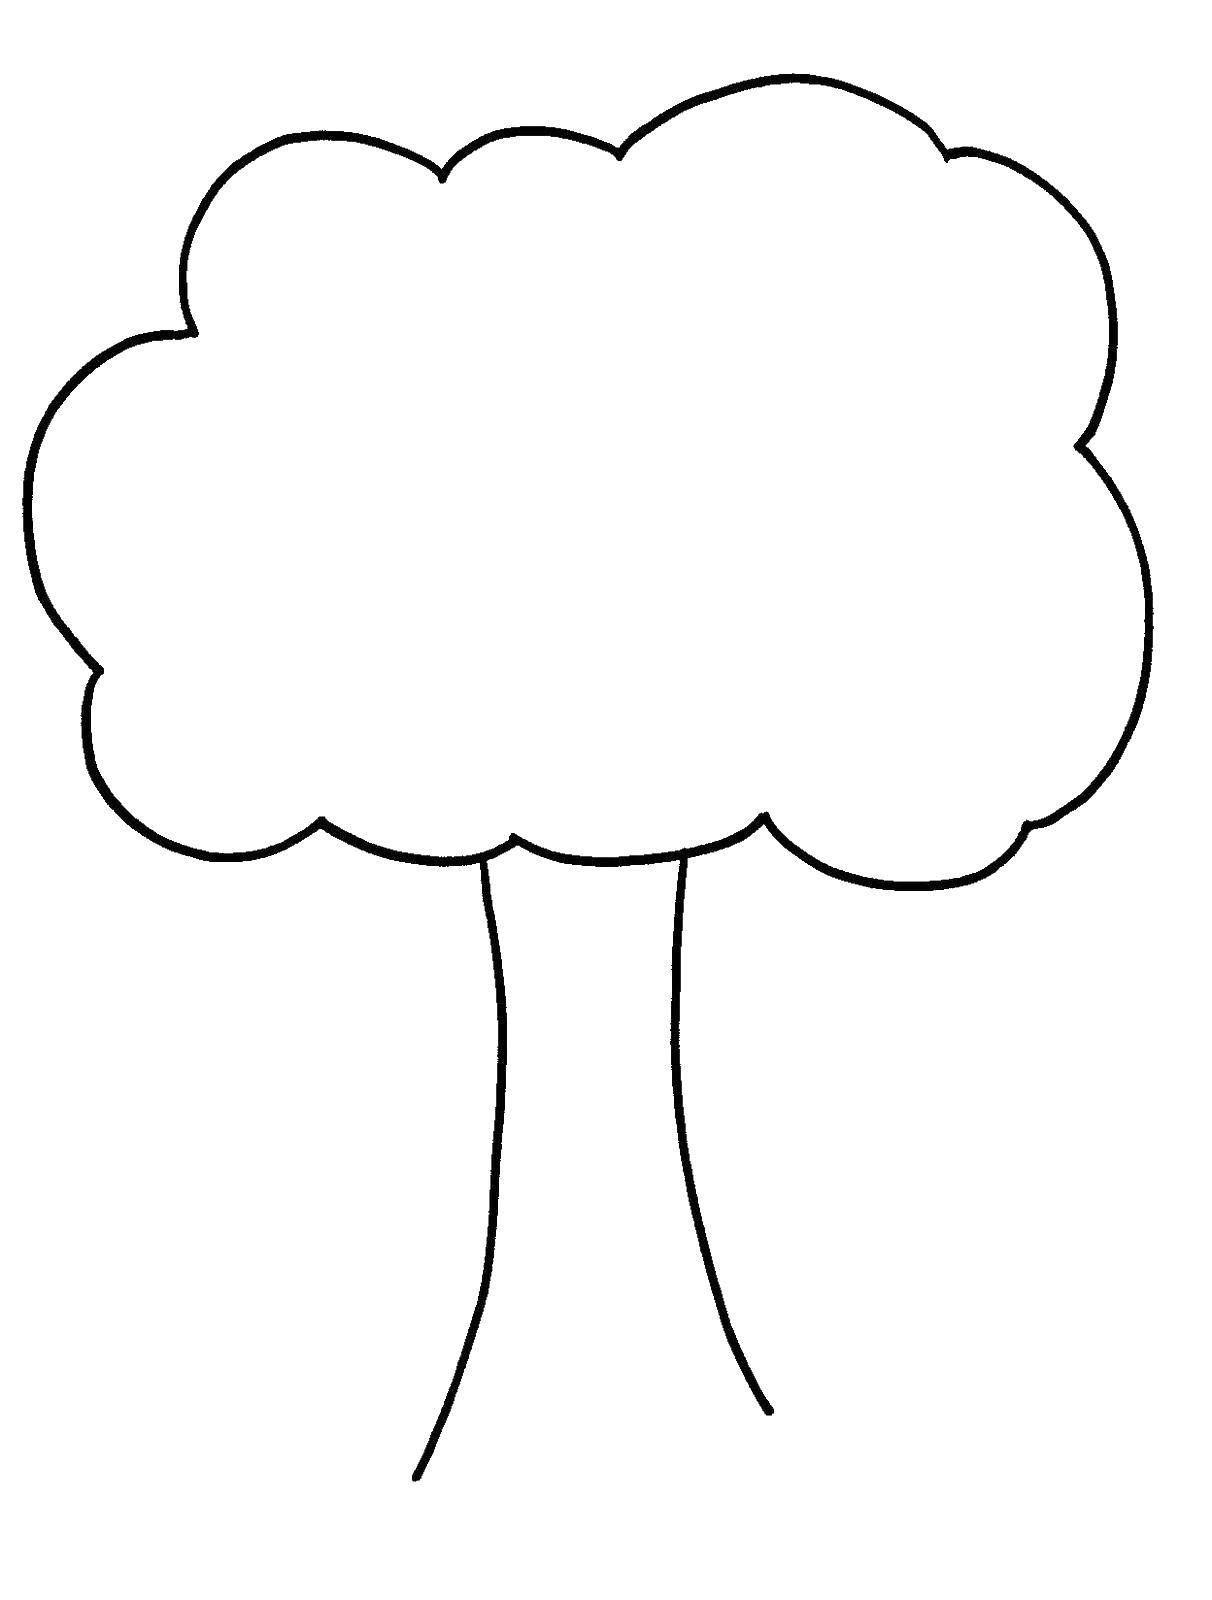 Coloring Tree with large crown. Category The contour of the tree. Tags:  The trees.